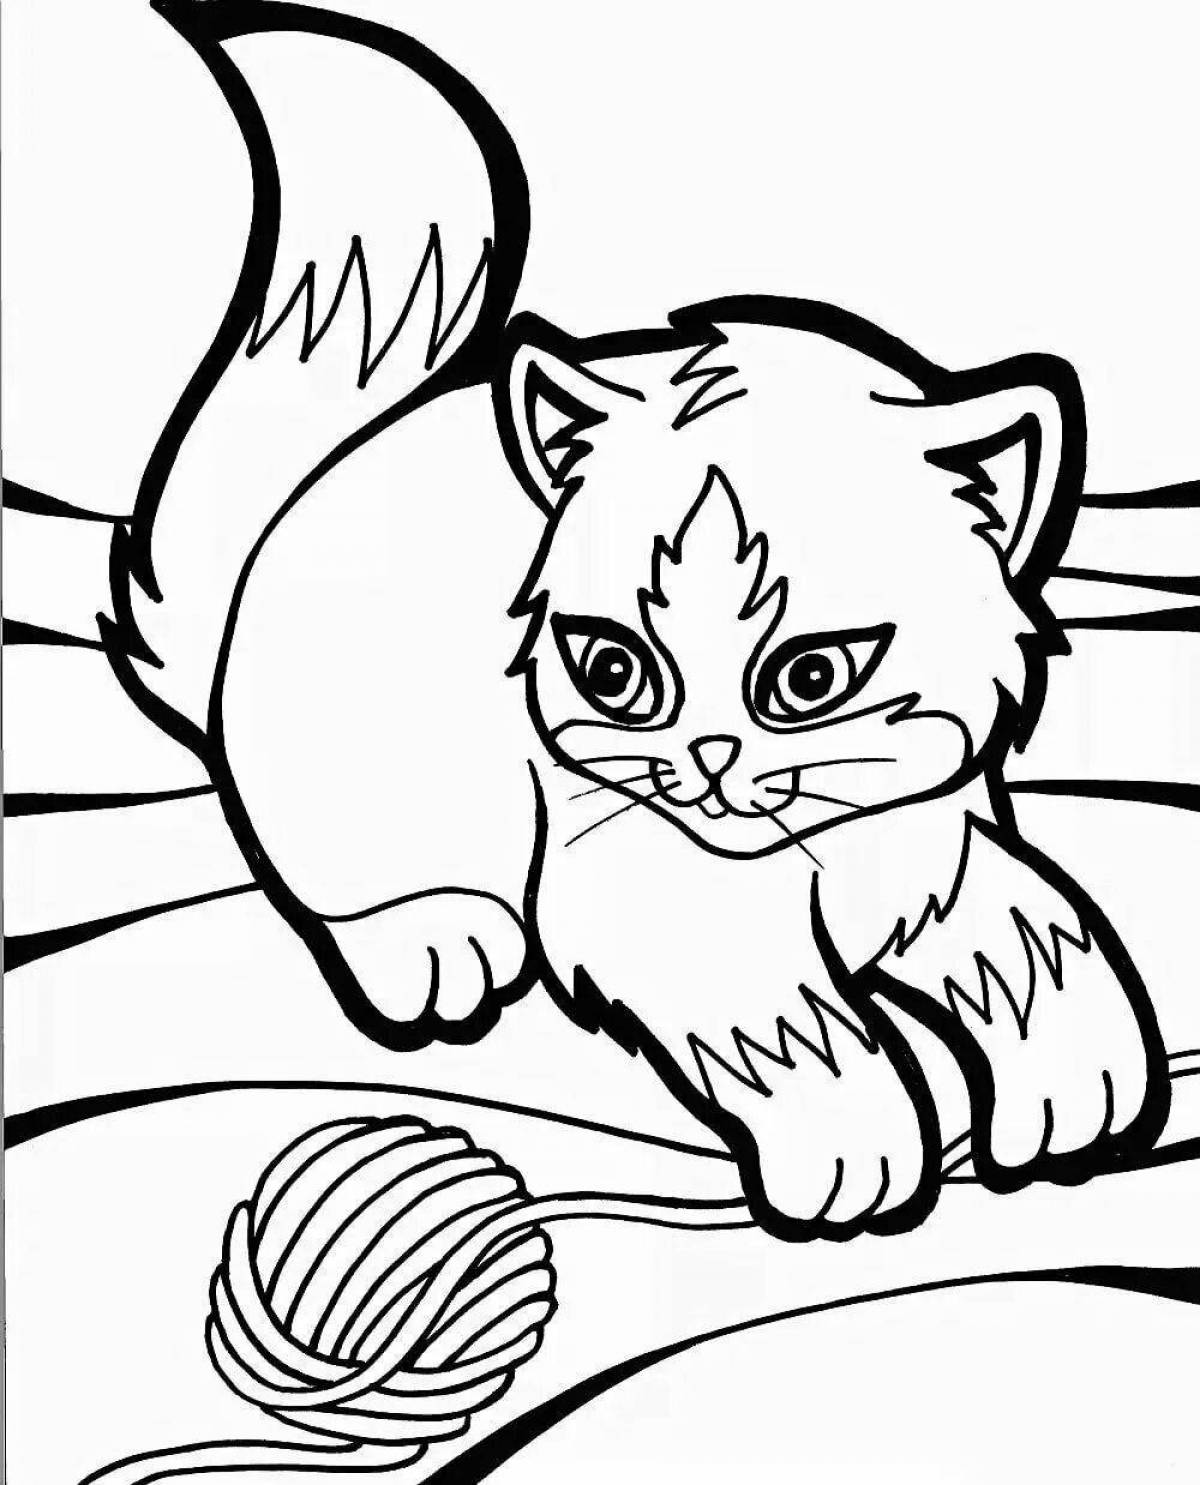 Adorable kittens coloring book